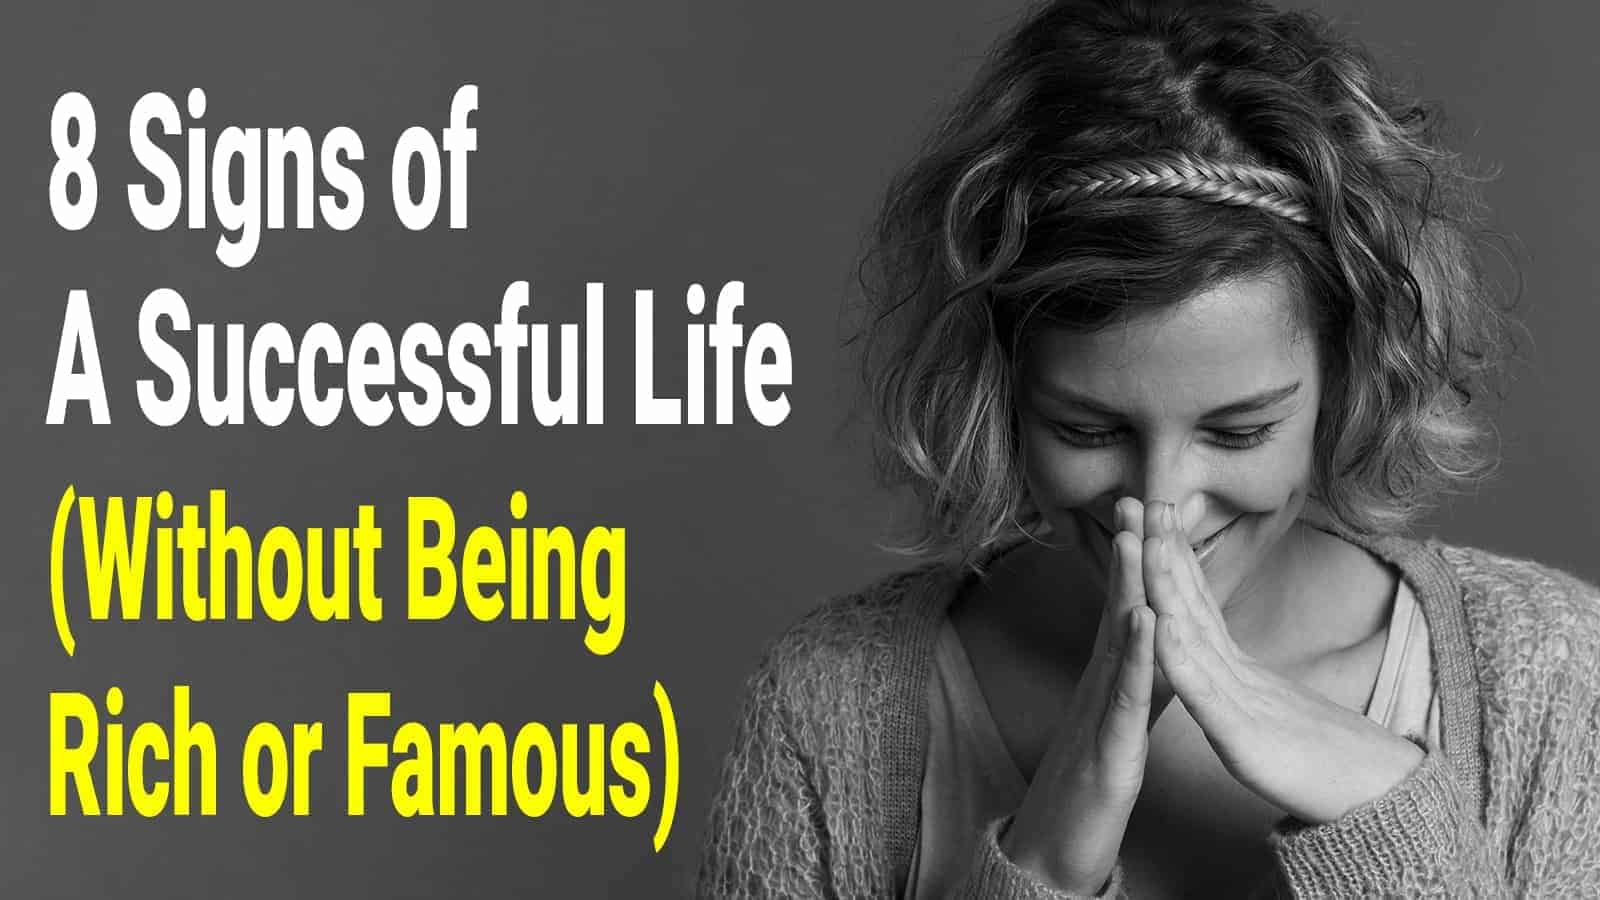 8 Signs of a Successful Life (Without Being Rich or Famous)